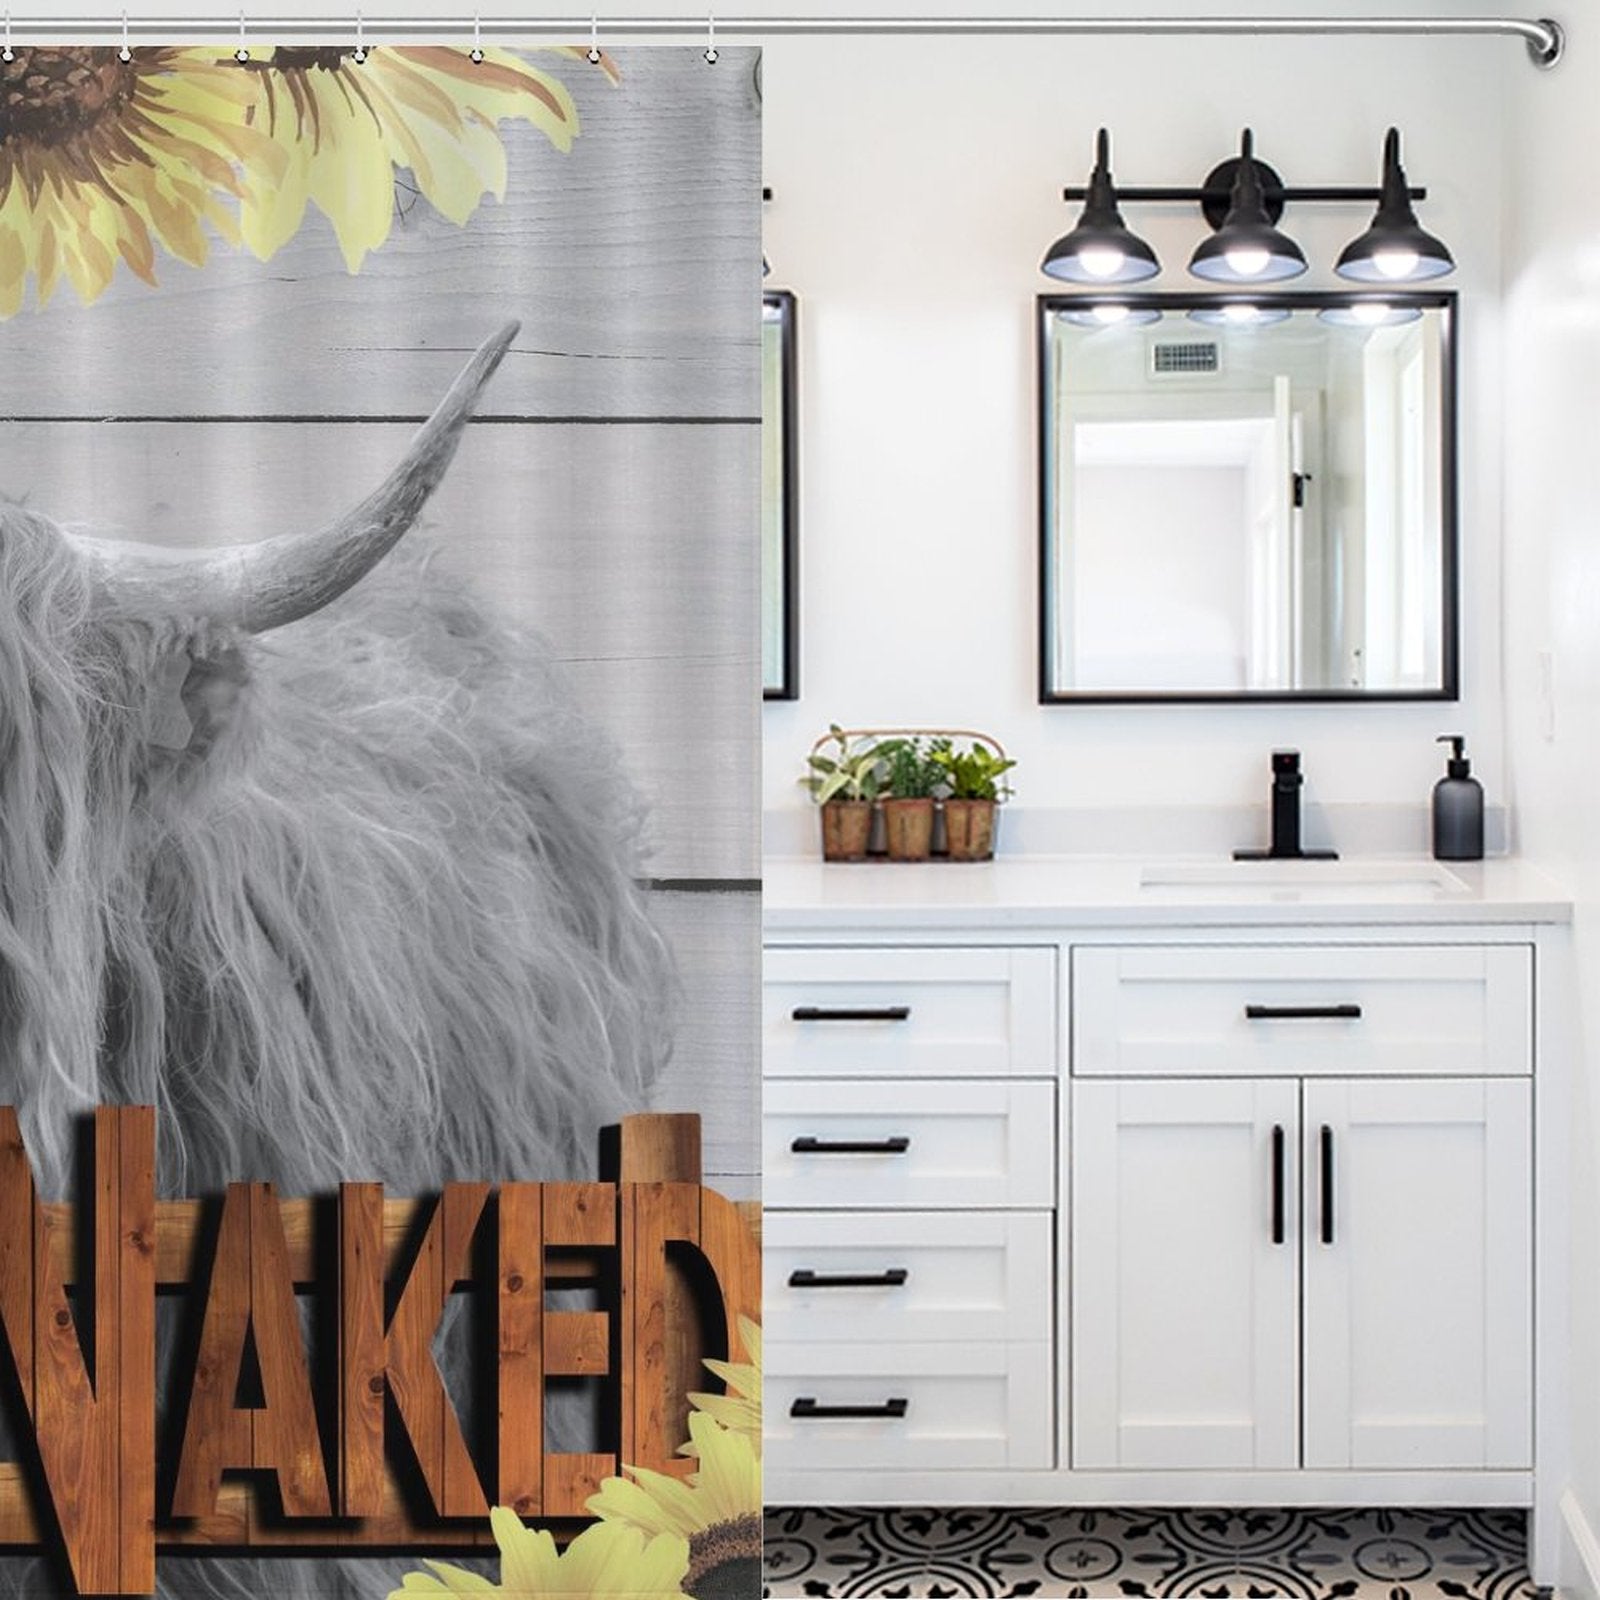 A bathroom with a white vanity, black fixtures, a potted plant, and a rustic touch featuring a Highland Cow Sunflowers Get Naked Shower Curtain-Cottoncat with the word "NUKED" partially obscured on it. Produced by Cotton Cat.